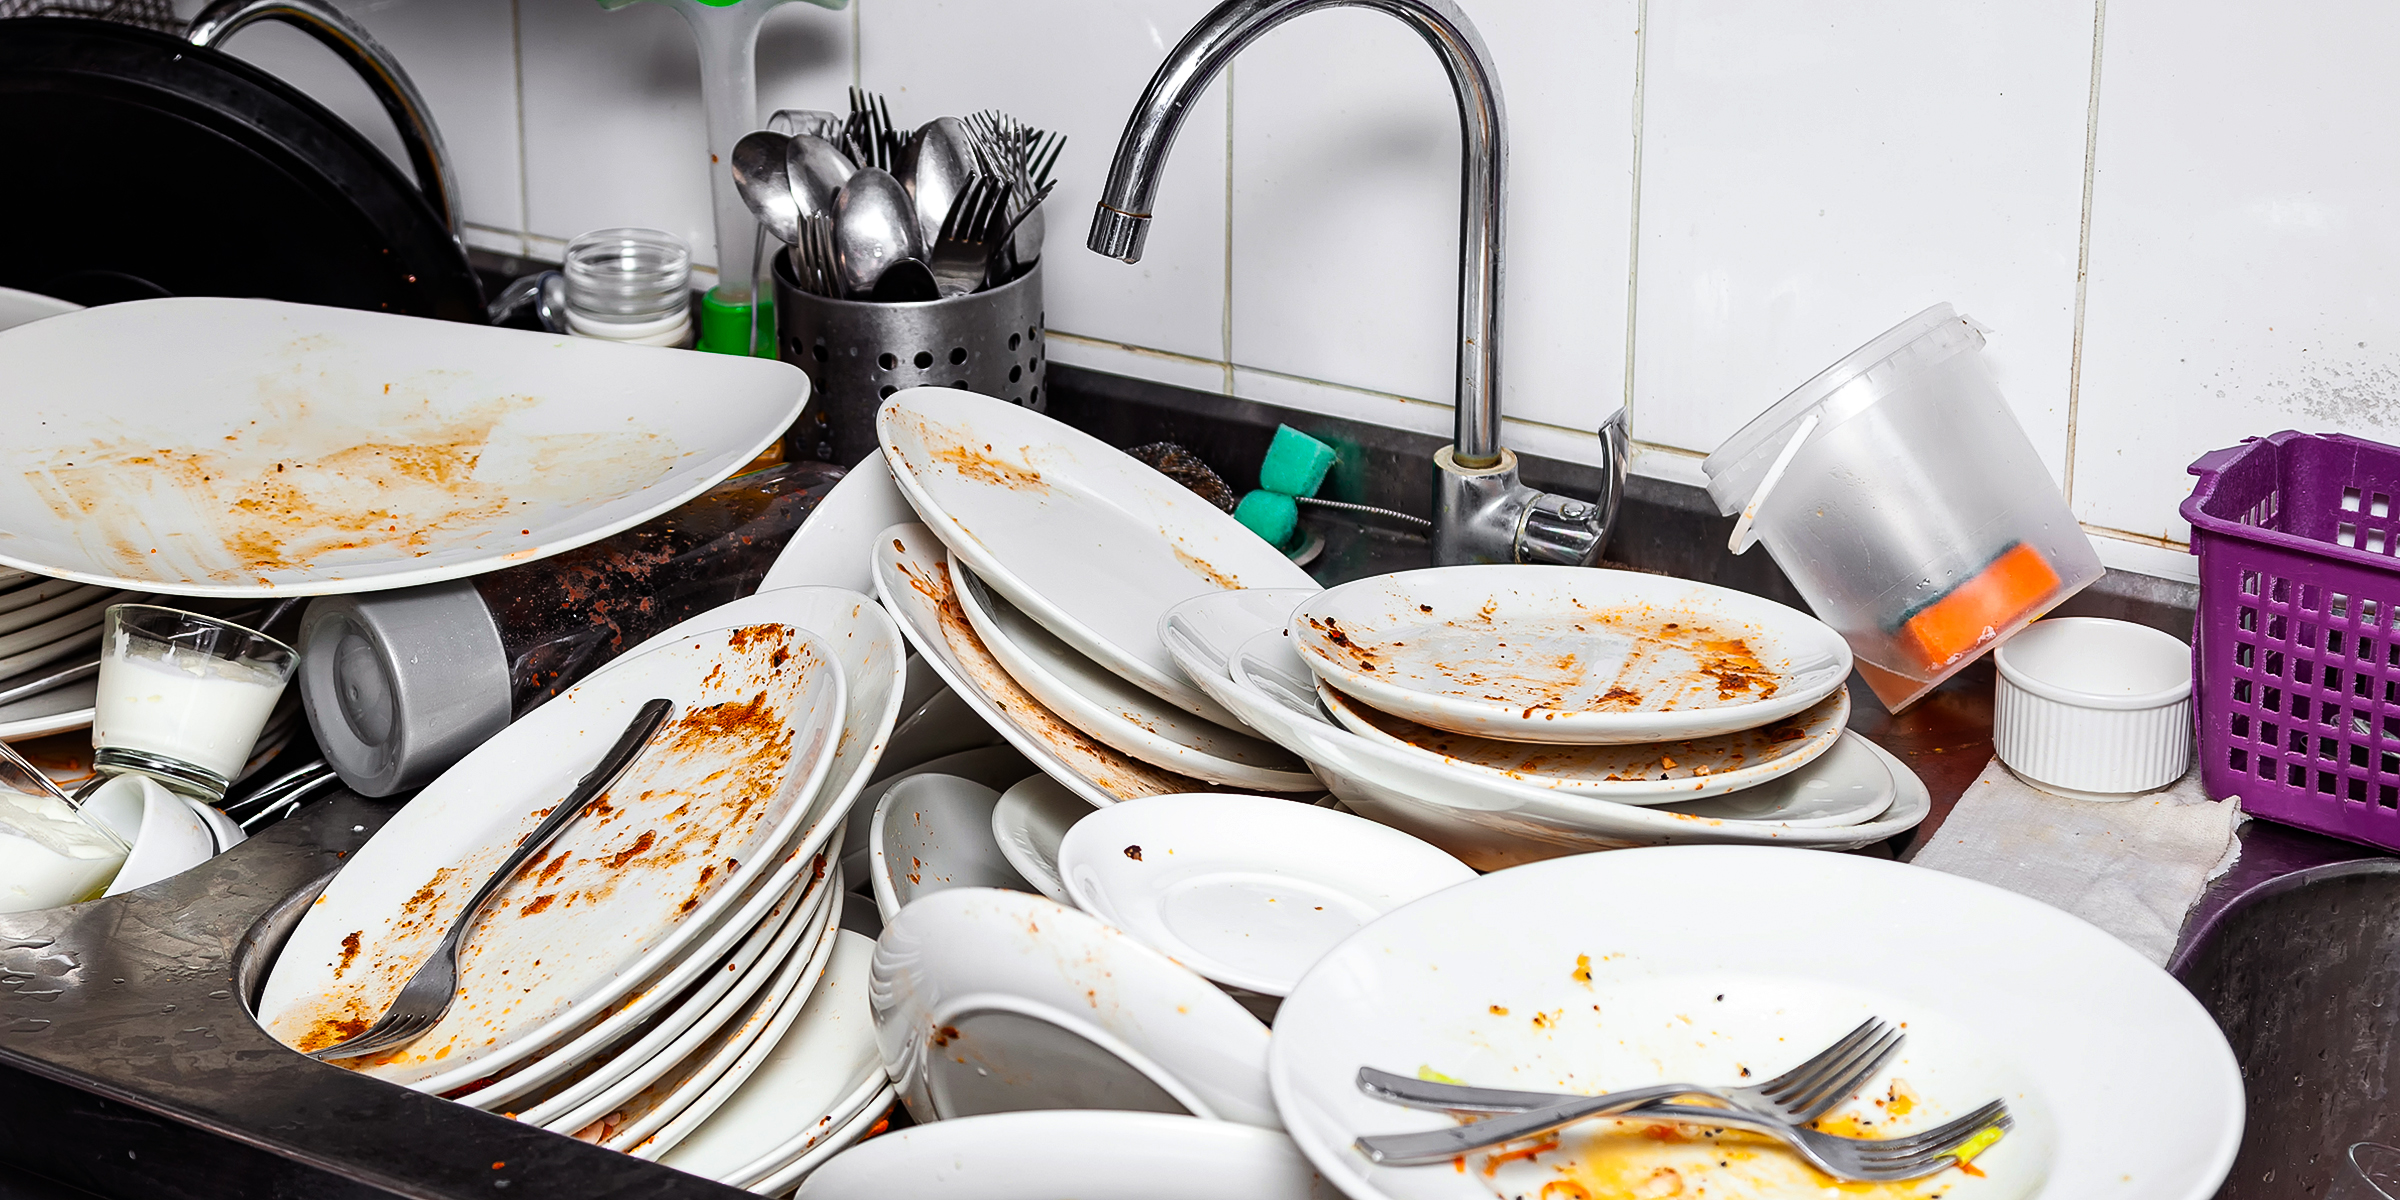 A sink full of dishes | Source: Shutterstock